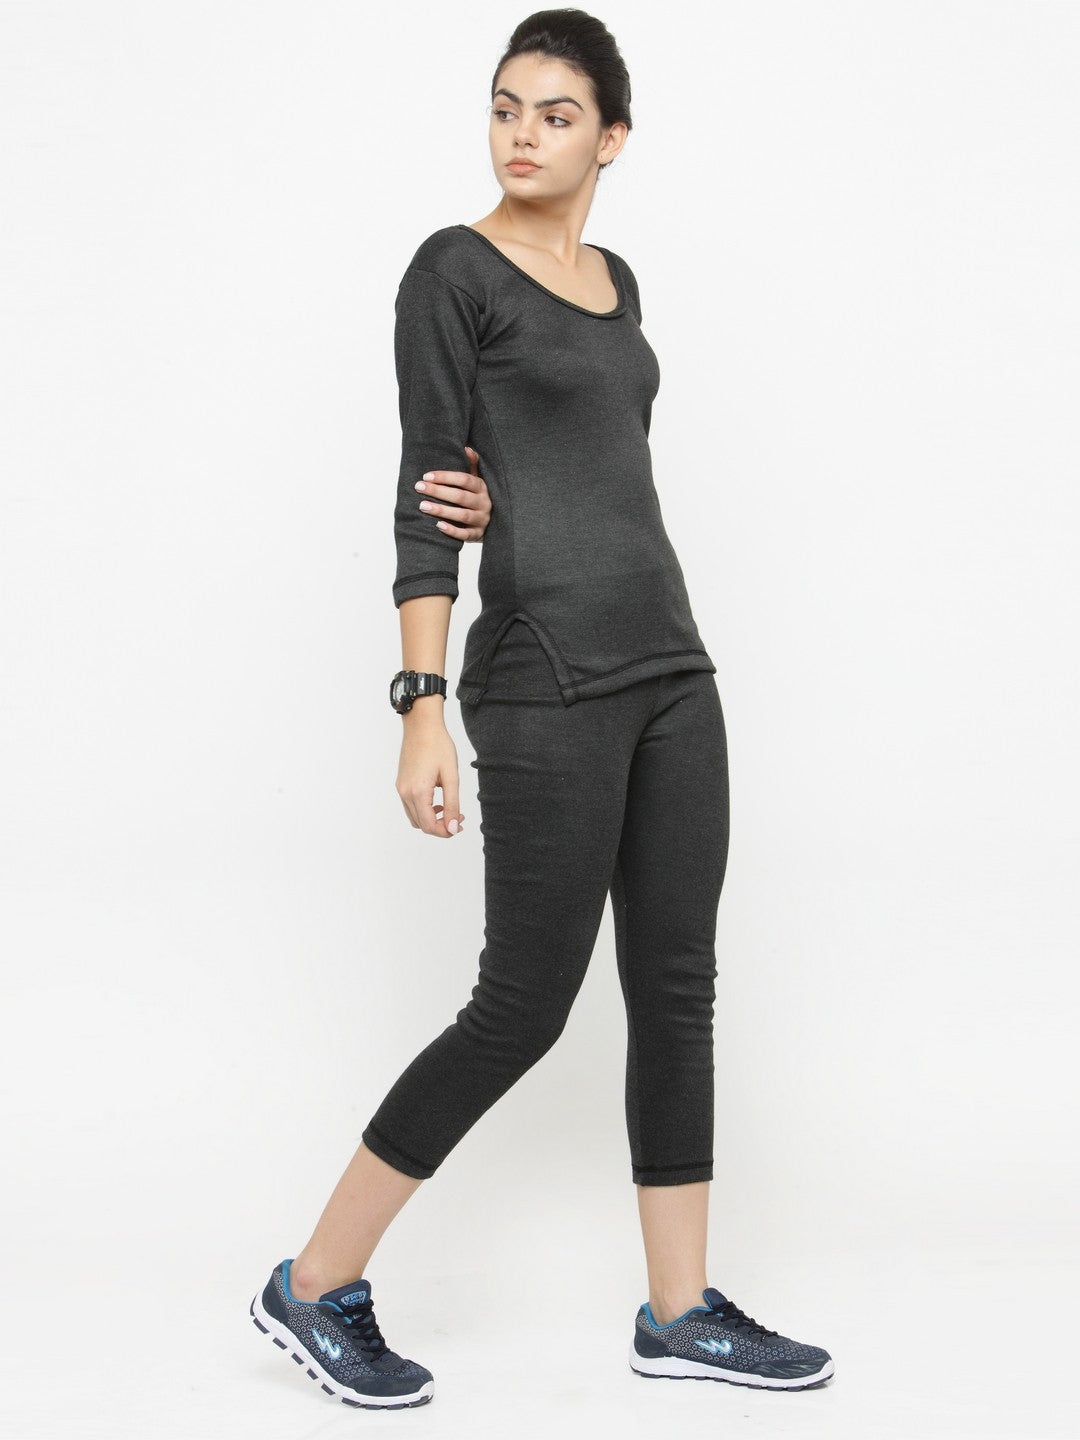 Ladies 3/4 Thermal Top and Lower Set For Use Winter Season Dark Gray With  Lines